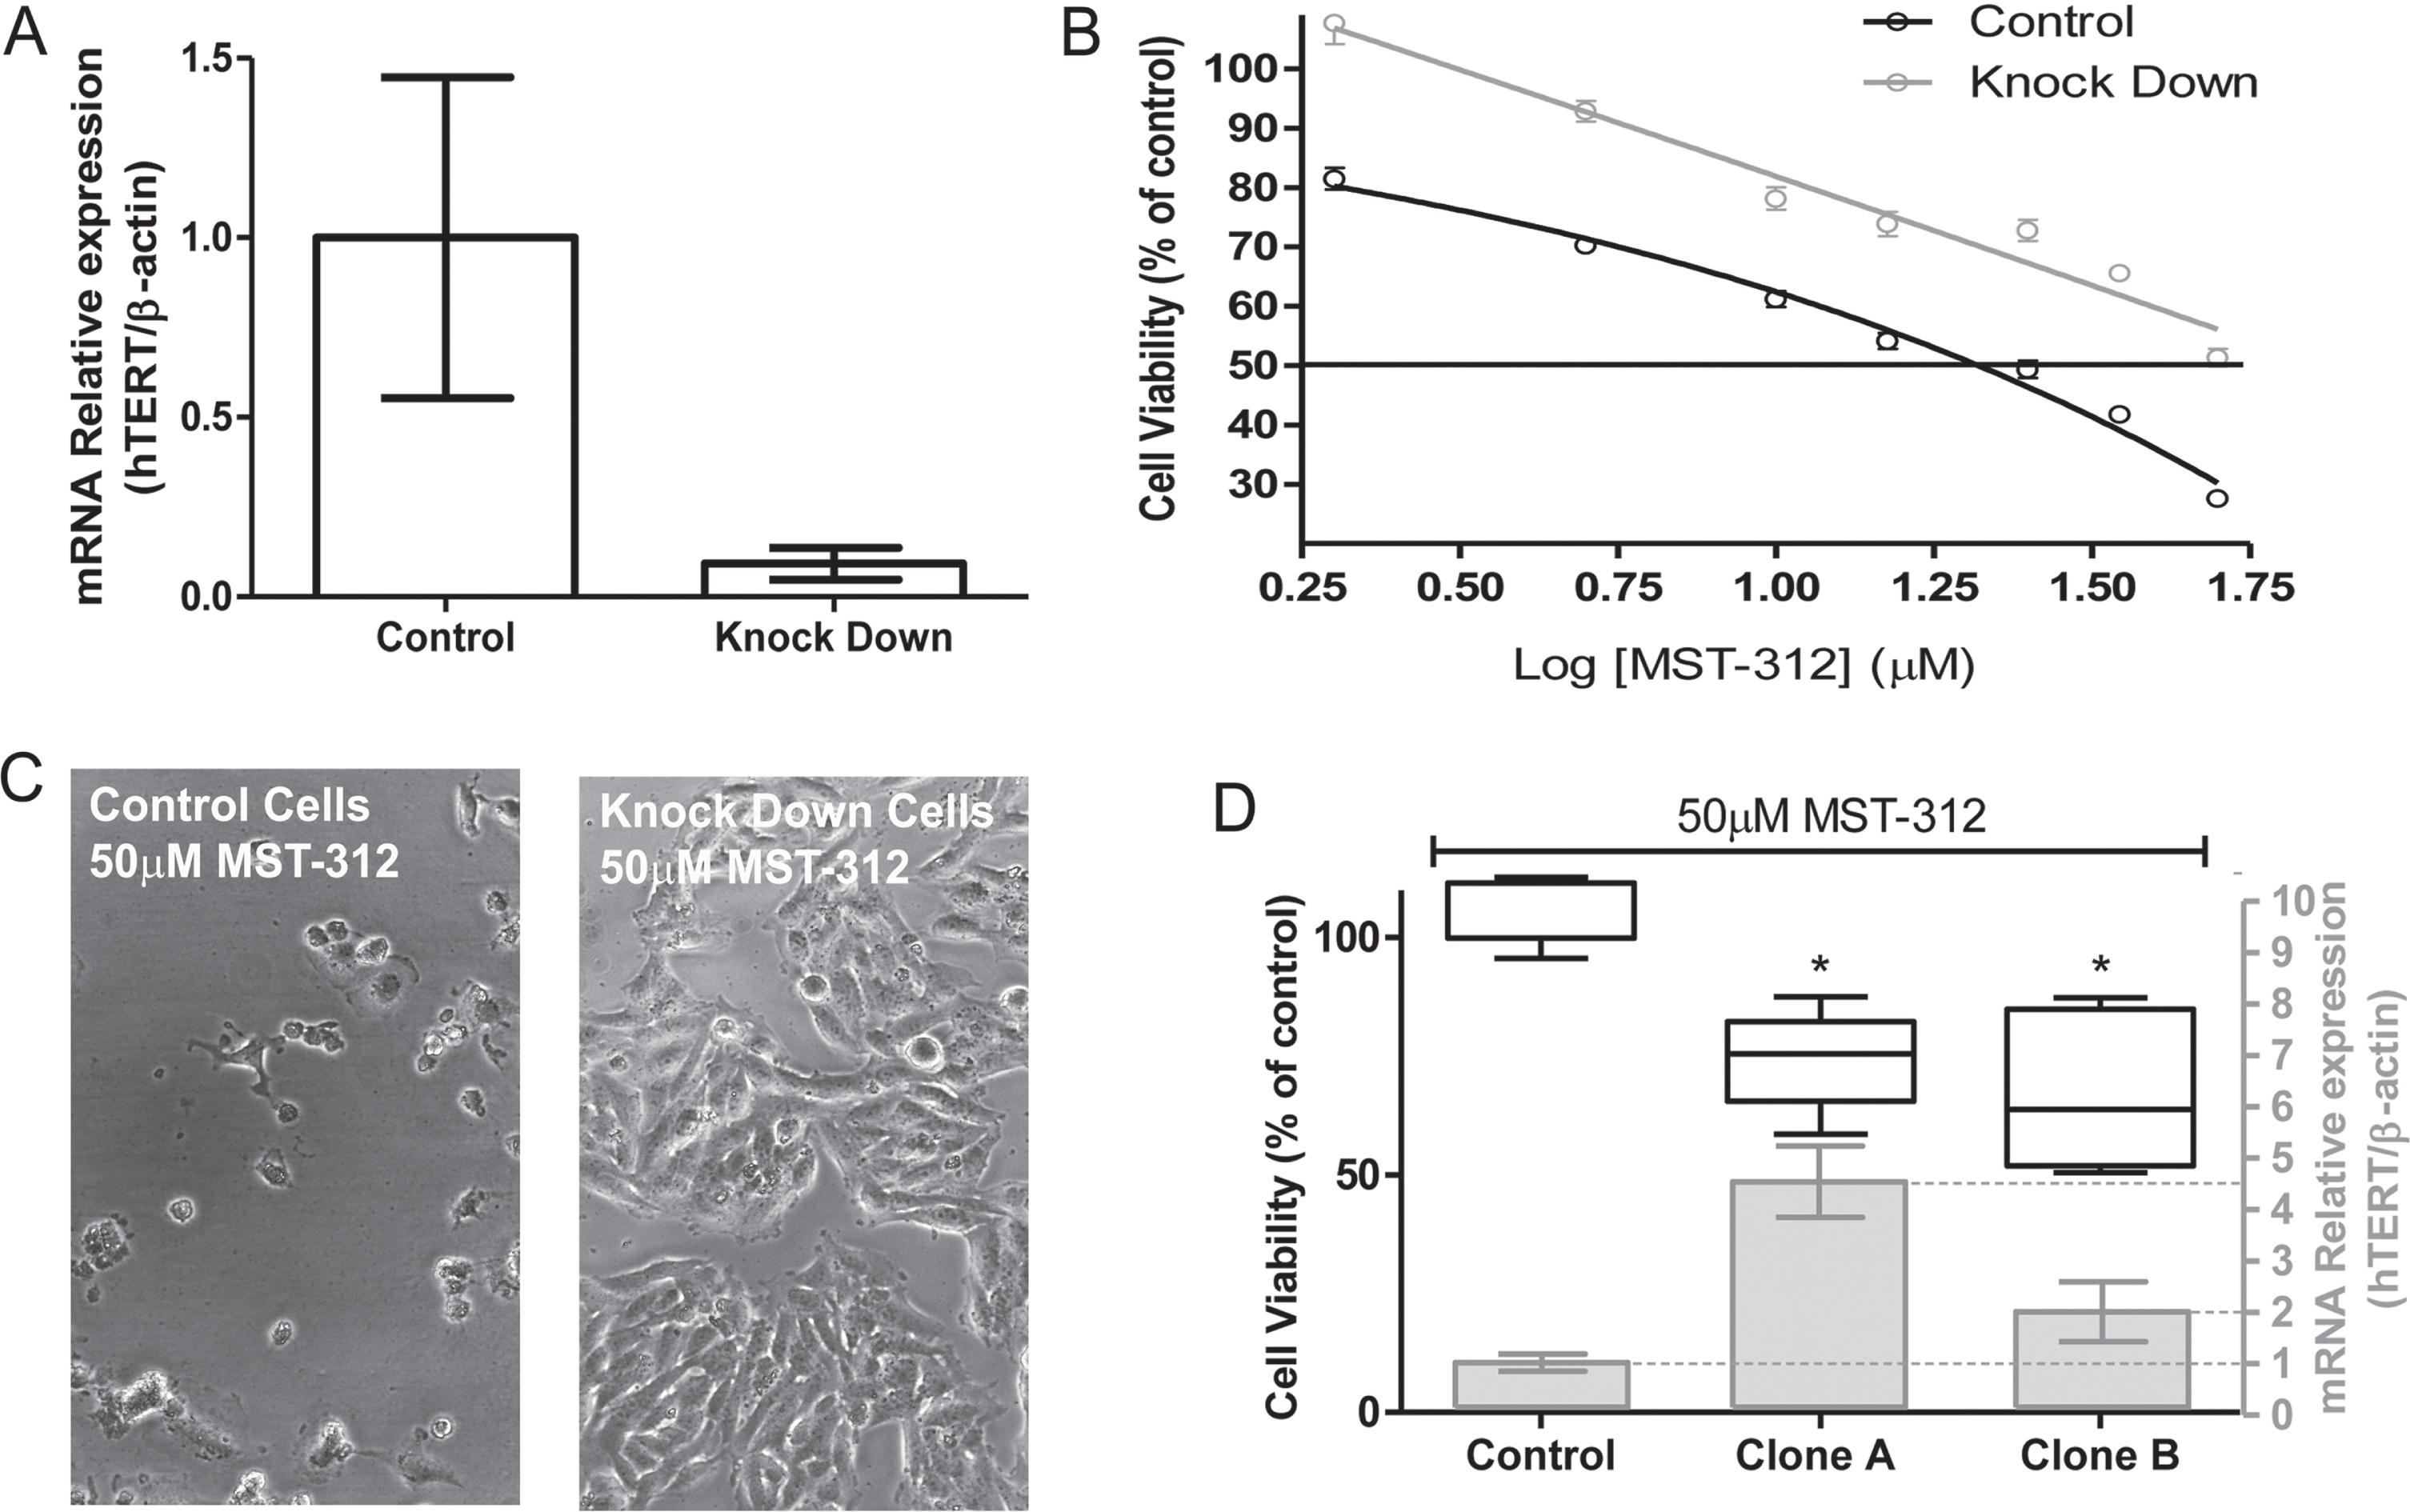 Toxic effect of MST-312 on TERT knock-down U-251 cells. (A) Characterization of knock-down cells by qPCR showing low TERT expression in TERT -shRNA plasmid transfected cells compared to control-shRNA plasmid transfected cells. (B) 72 h dose-response curve (MTT assay, the control is not shown due to the use of log of concentrations - basal viability values in both control and KD groups were comparable) showing that TERT knock-down cells are more resistant to MST-312 effects, which was also clearly demonstrated by phase-contrast microscopy analysis (C). (D) In addition, clonal cultures with high TERT expression exhibited greater susceptibility to high concentration of the drug (50μM) (72 h treatment; * two-tailed p value < 0.05; Mann-Whitney test).